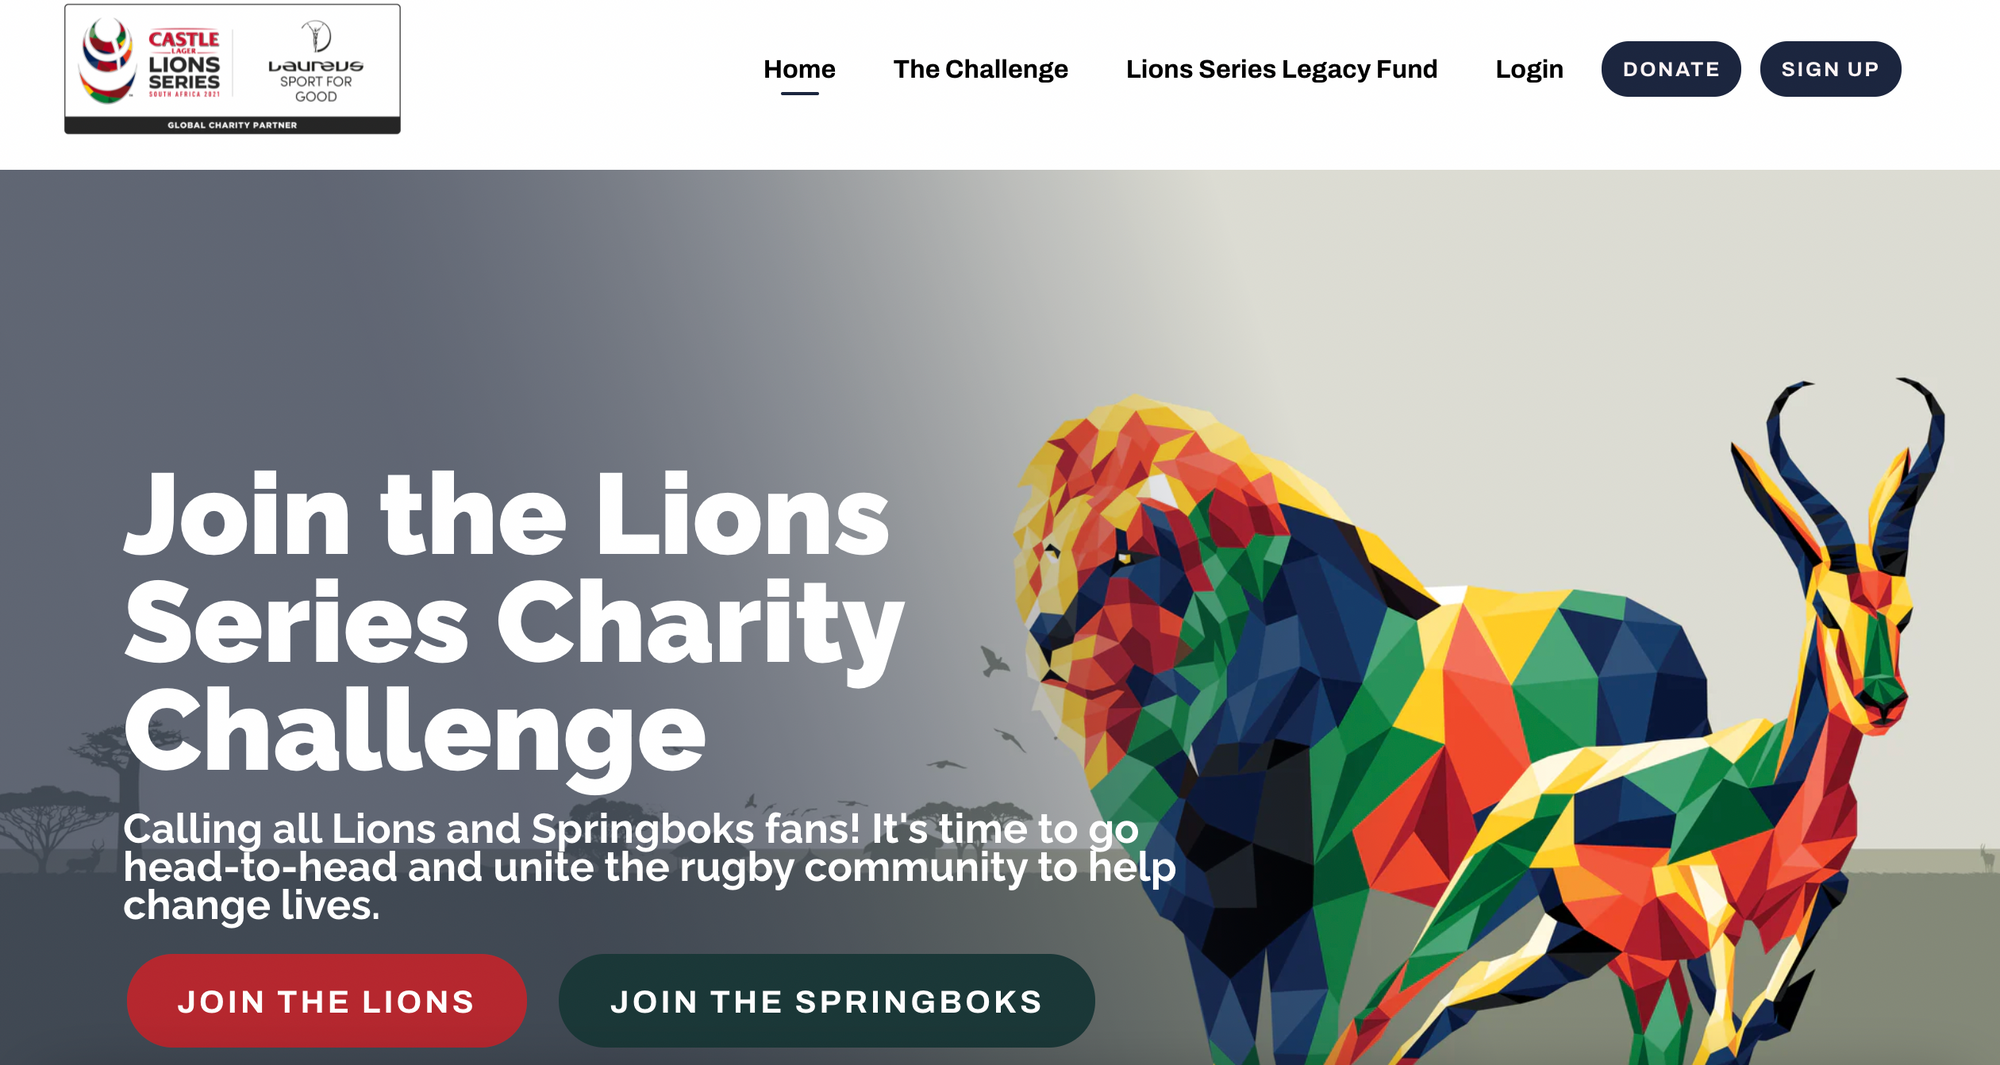 Lion Series Charity Challenge campaign.